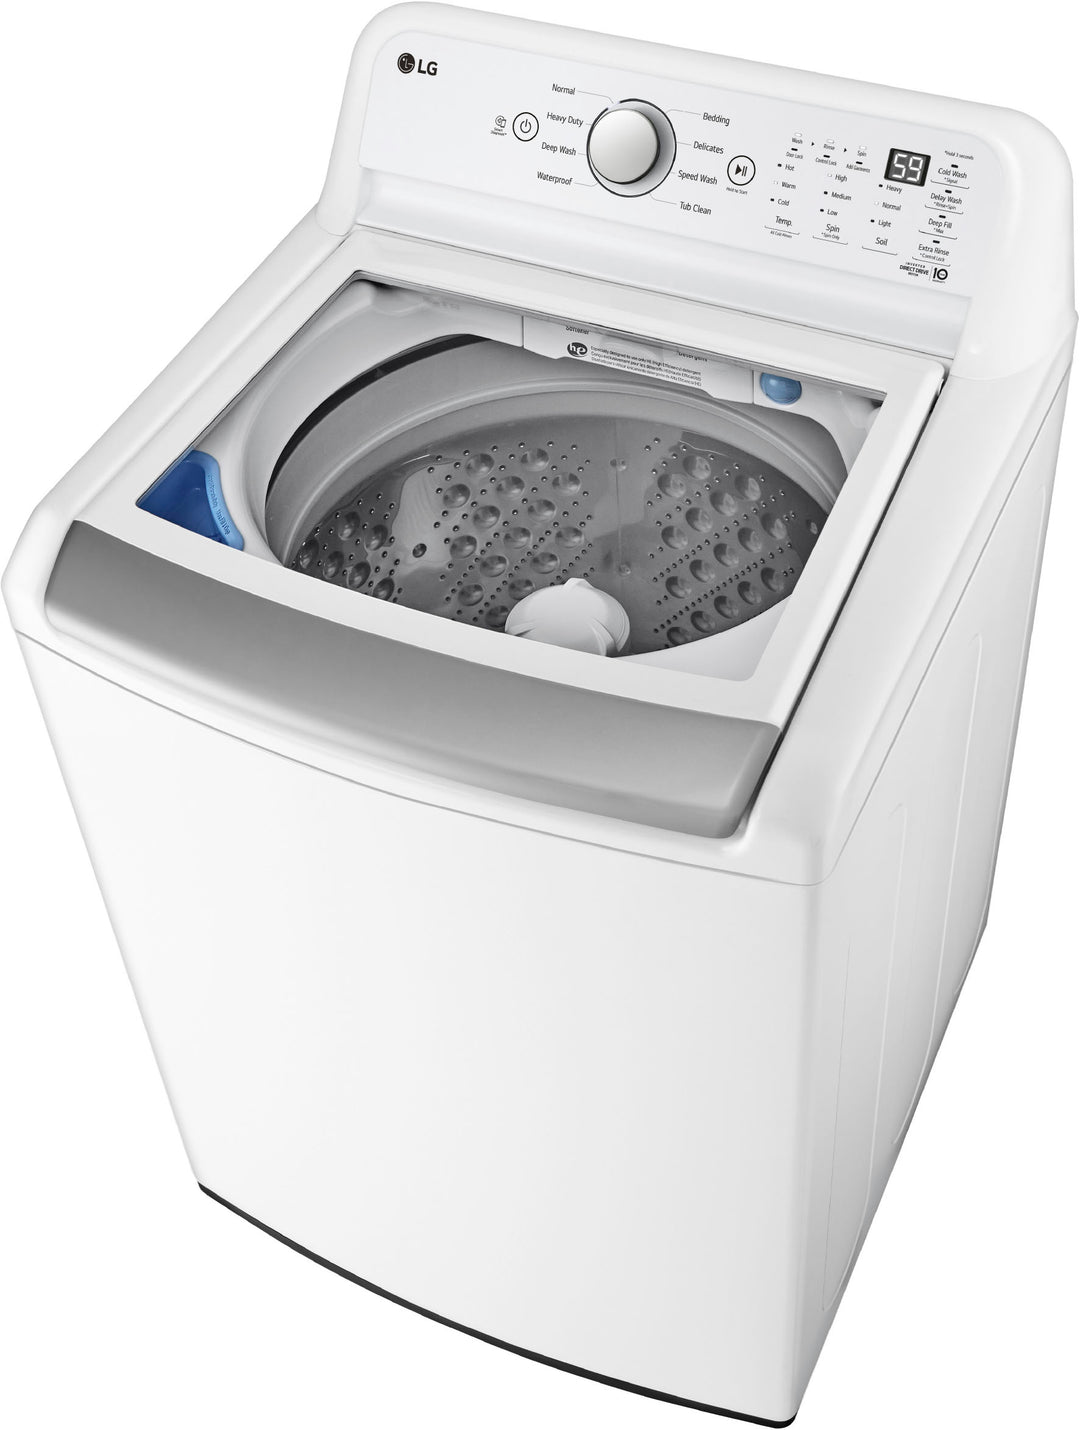 LG - 4.8 Cu. Ft. High-Efficiency Smart Top Load Washer with 4 Way Agitator and TurboDrum - White_2